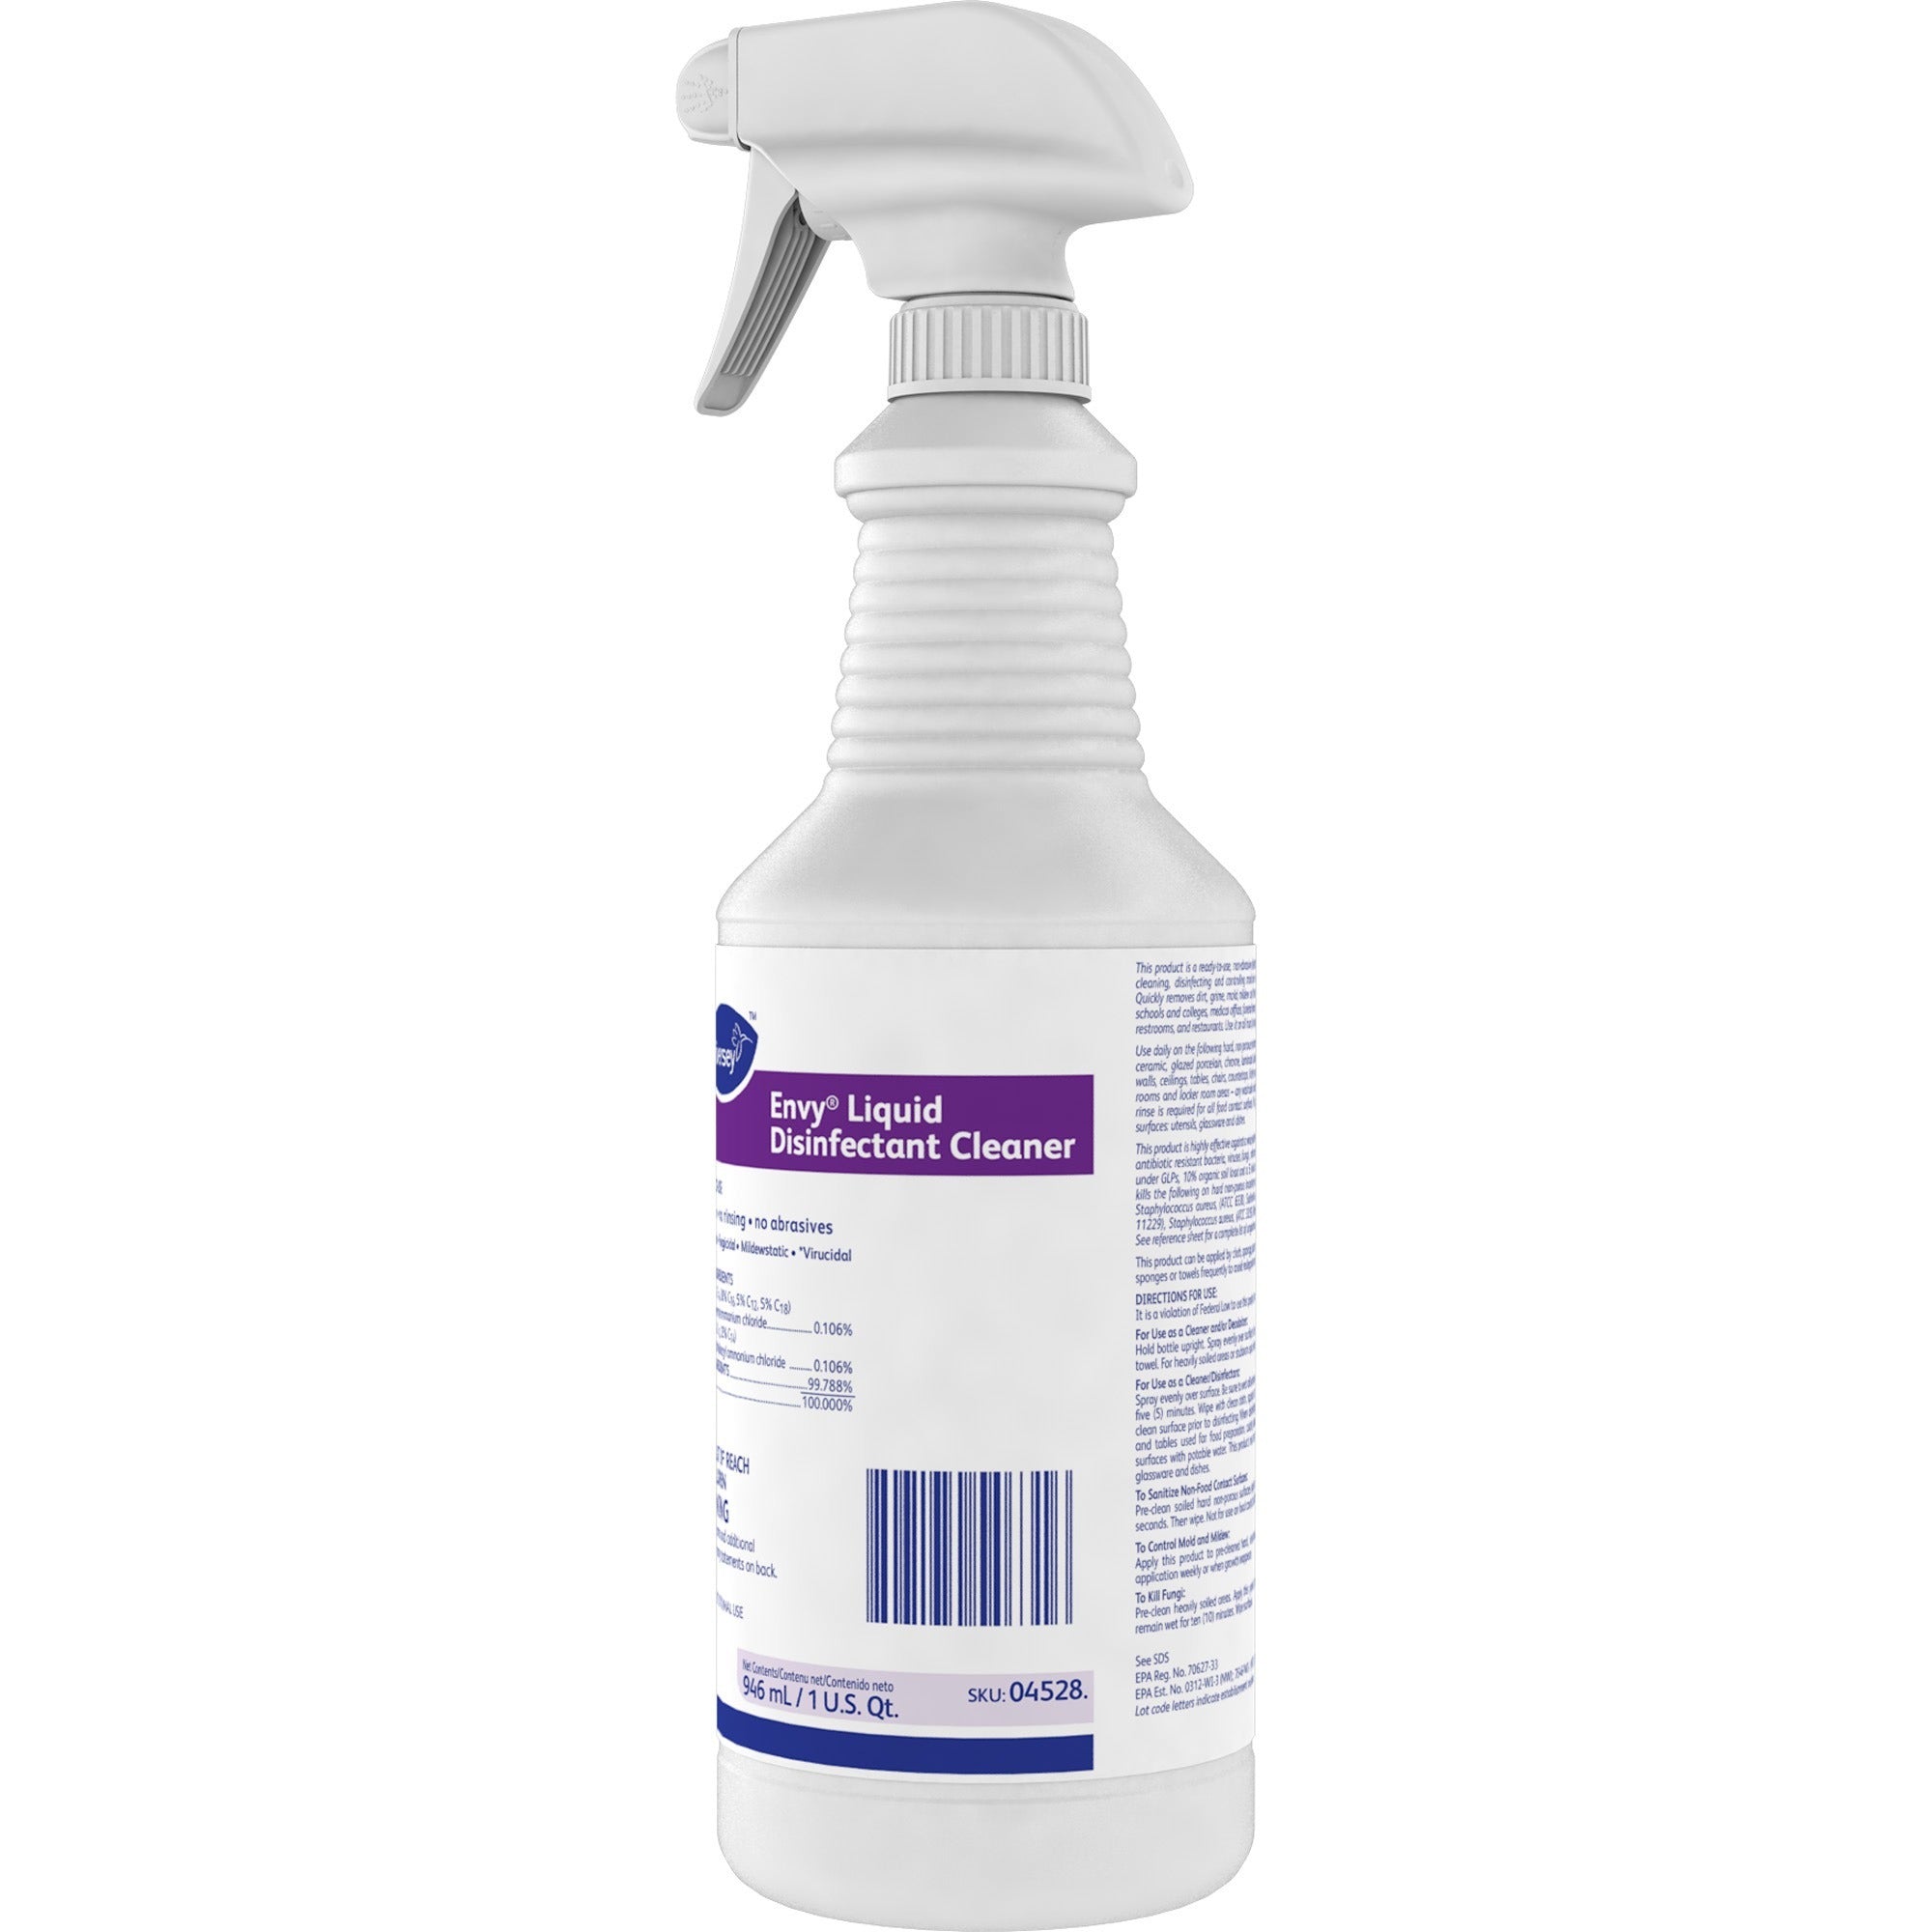 diversey-envy-liquid-disinfectant-cleaner-ready-to-use-32-fl-oz-1-quart-lavender-ammonia-scent-1-each-color-free-disinfectant-virucidal-bactericide-fungicide-mildewstatic-rinse-free-non-abrasive-deodorize-clear_dvo04528 - 5